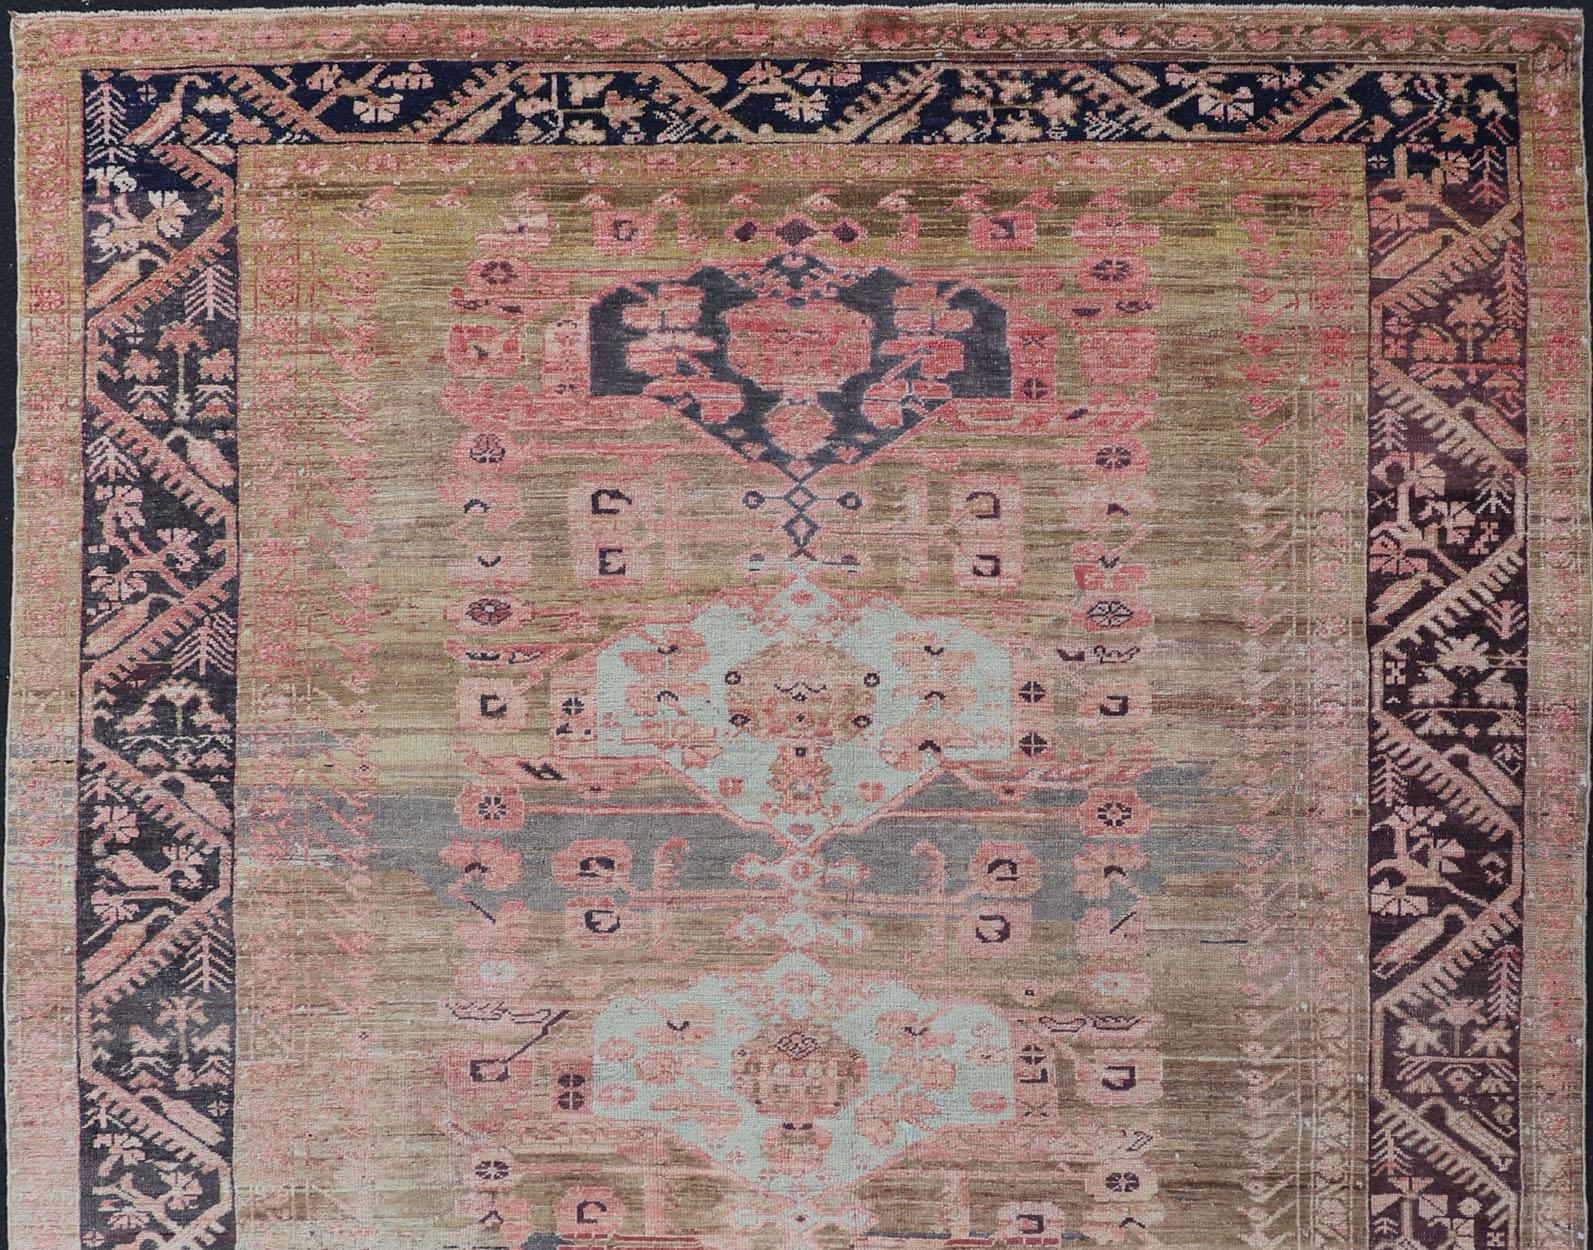 Early 20th century finely woven antique Turkish Oushak rug with abrash/color variation in the center. The background consist of  light Green Background with pink and blue. Keivan Woven Arts rug/EN-179970, country of origin / type: Turkey / Oushak,